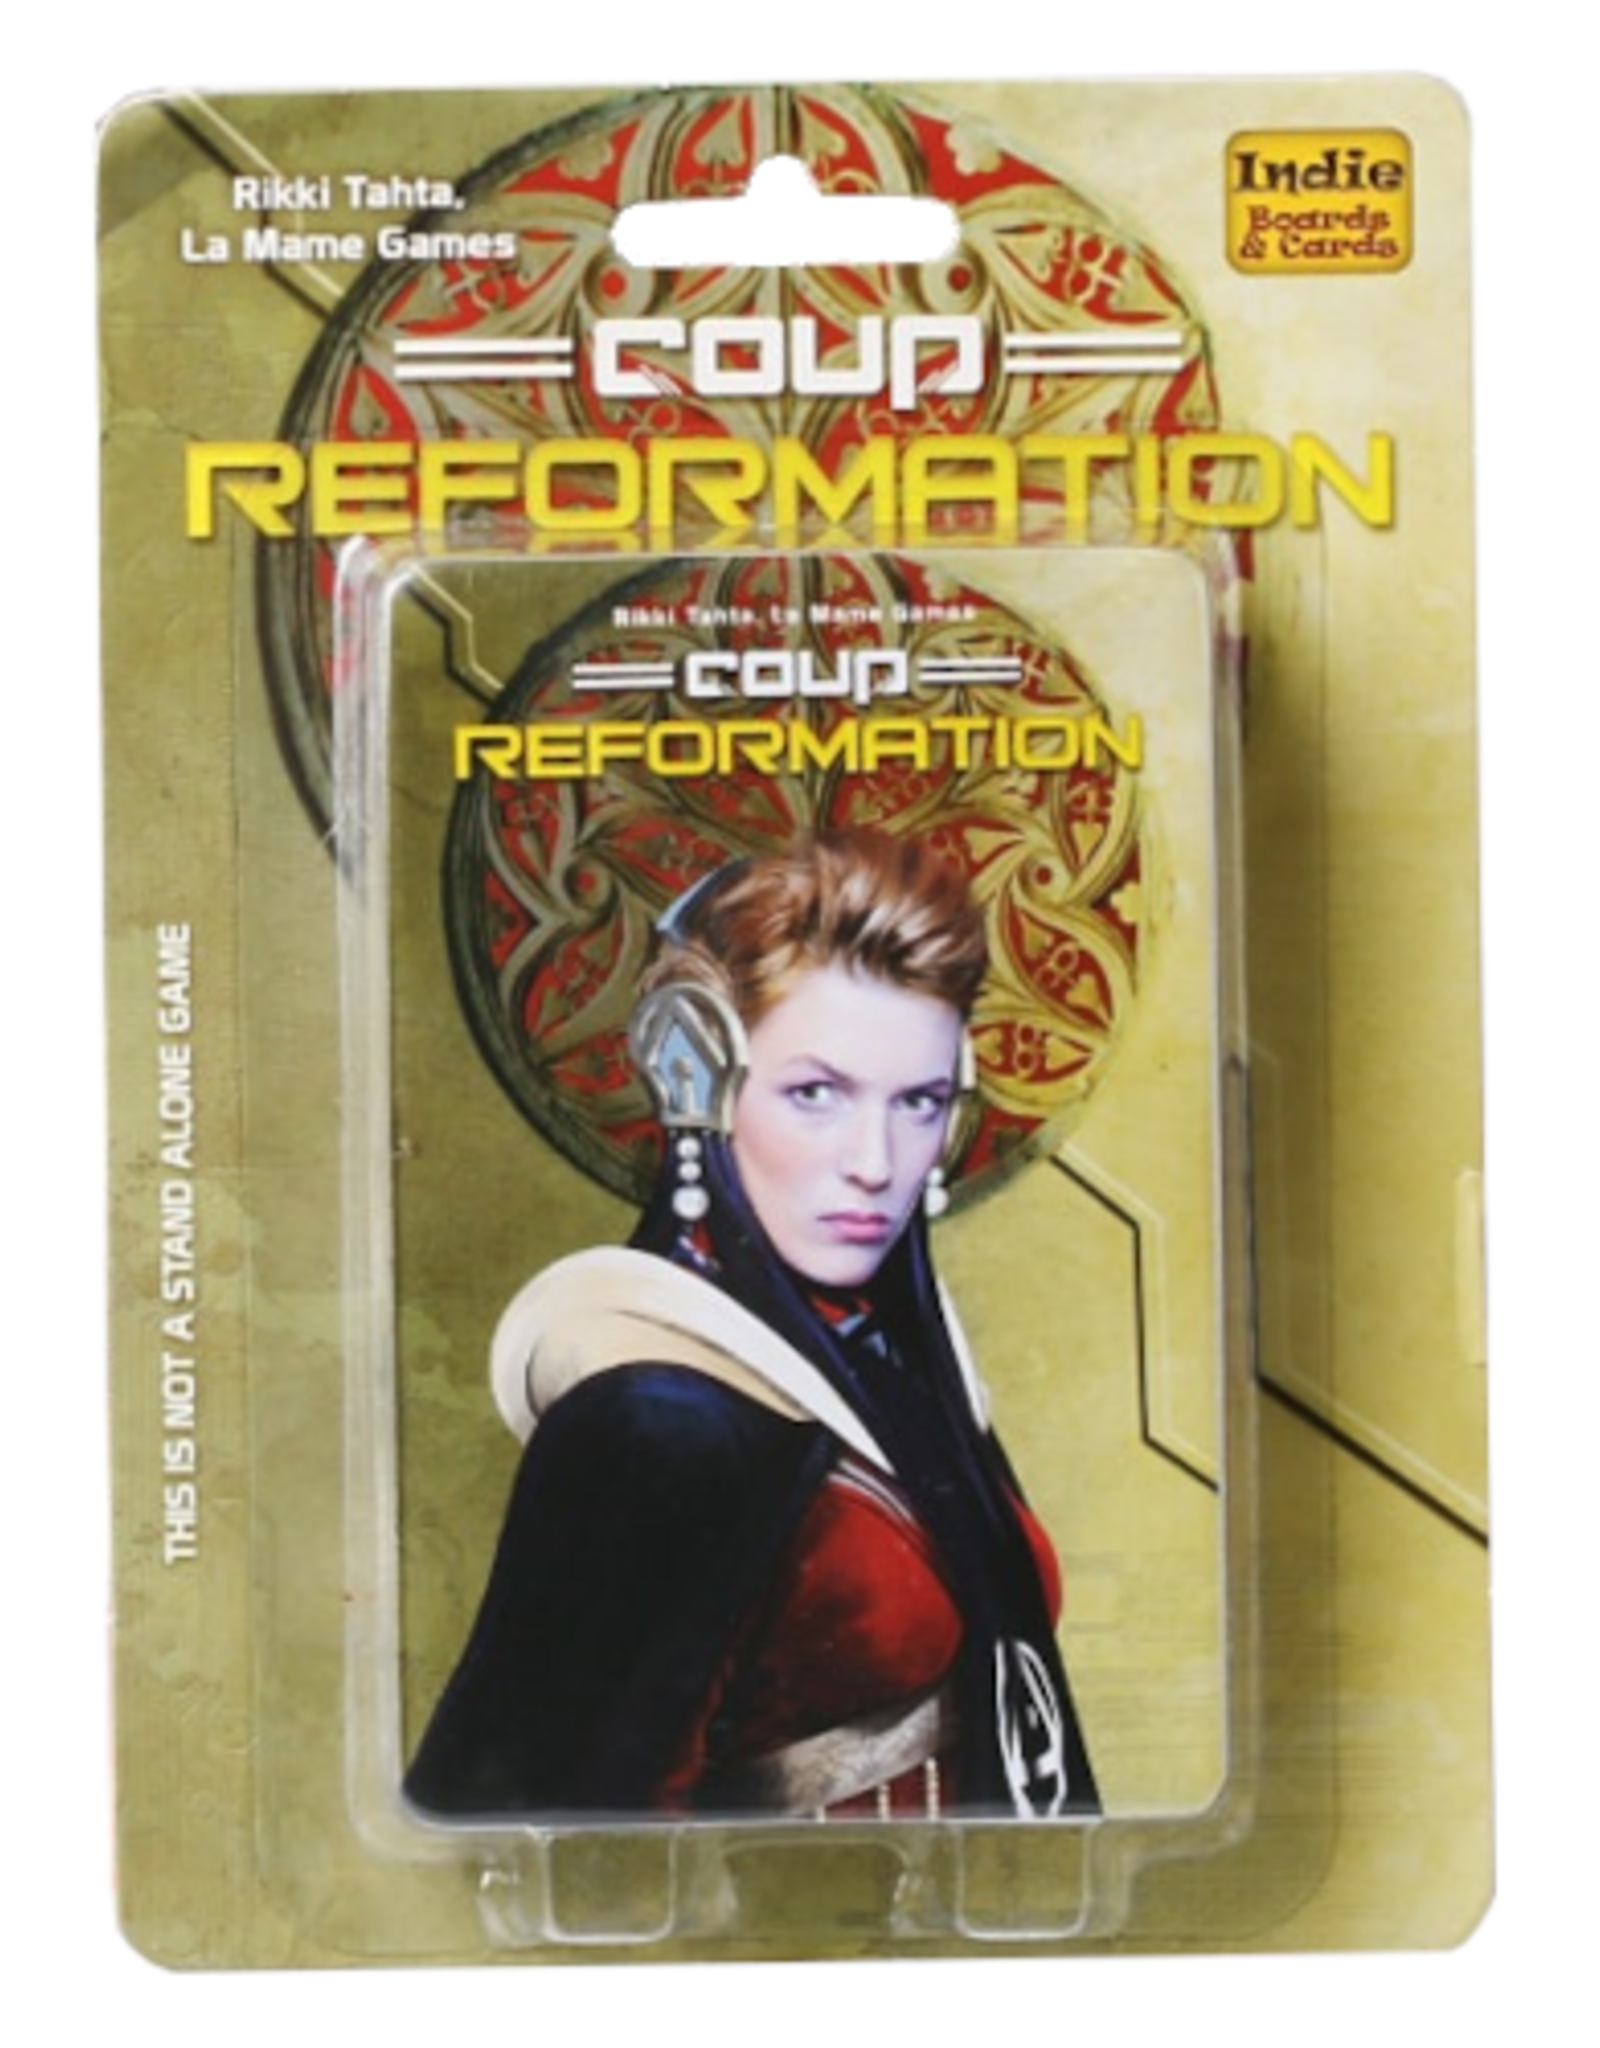 Indie Boards & Cards - Coup Reformation Expansion